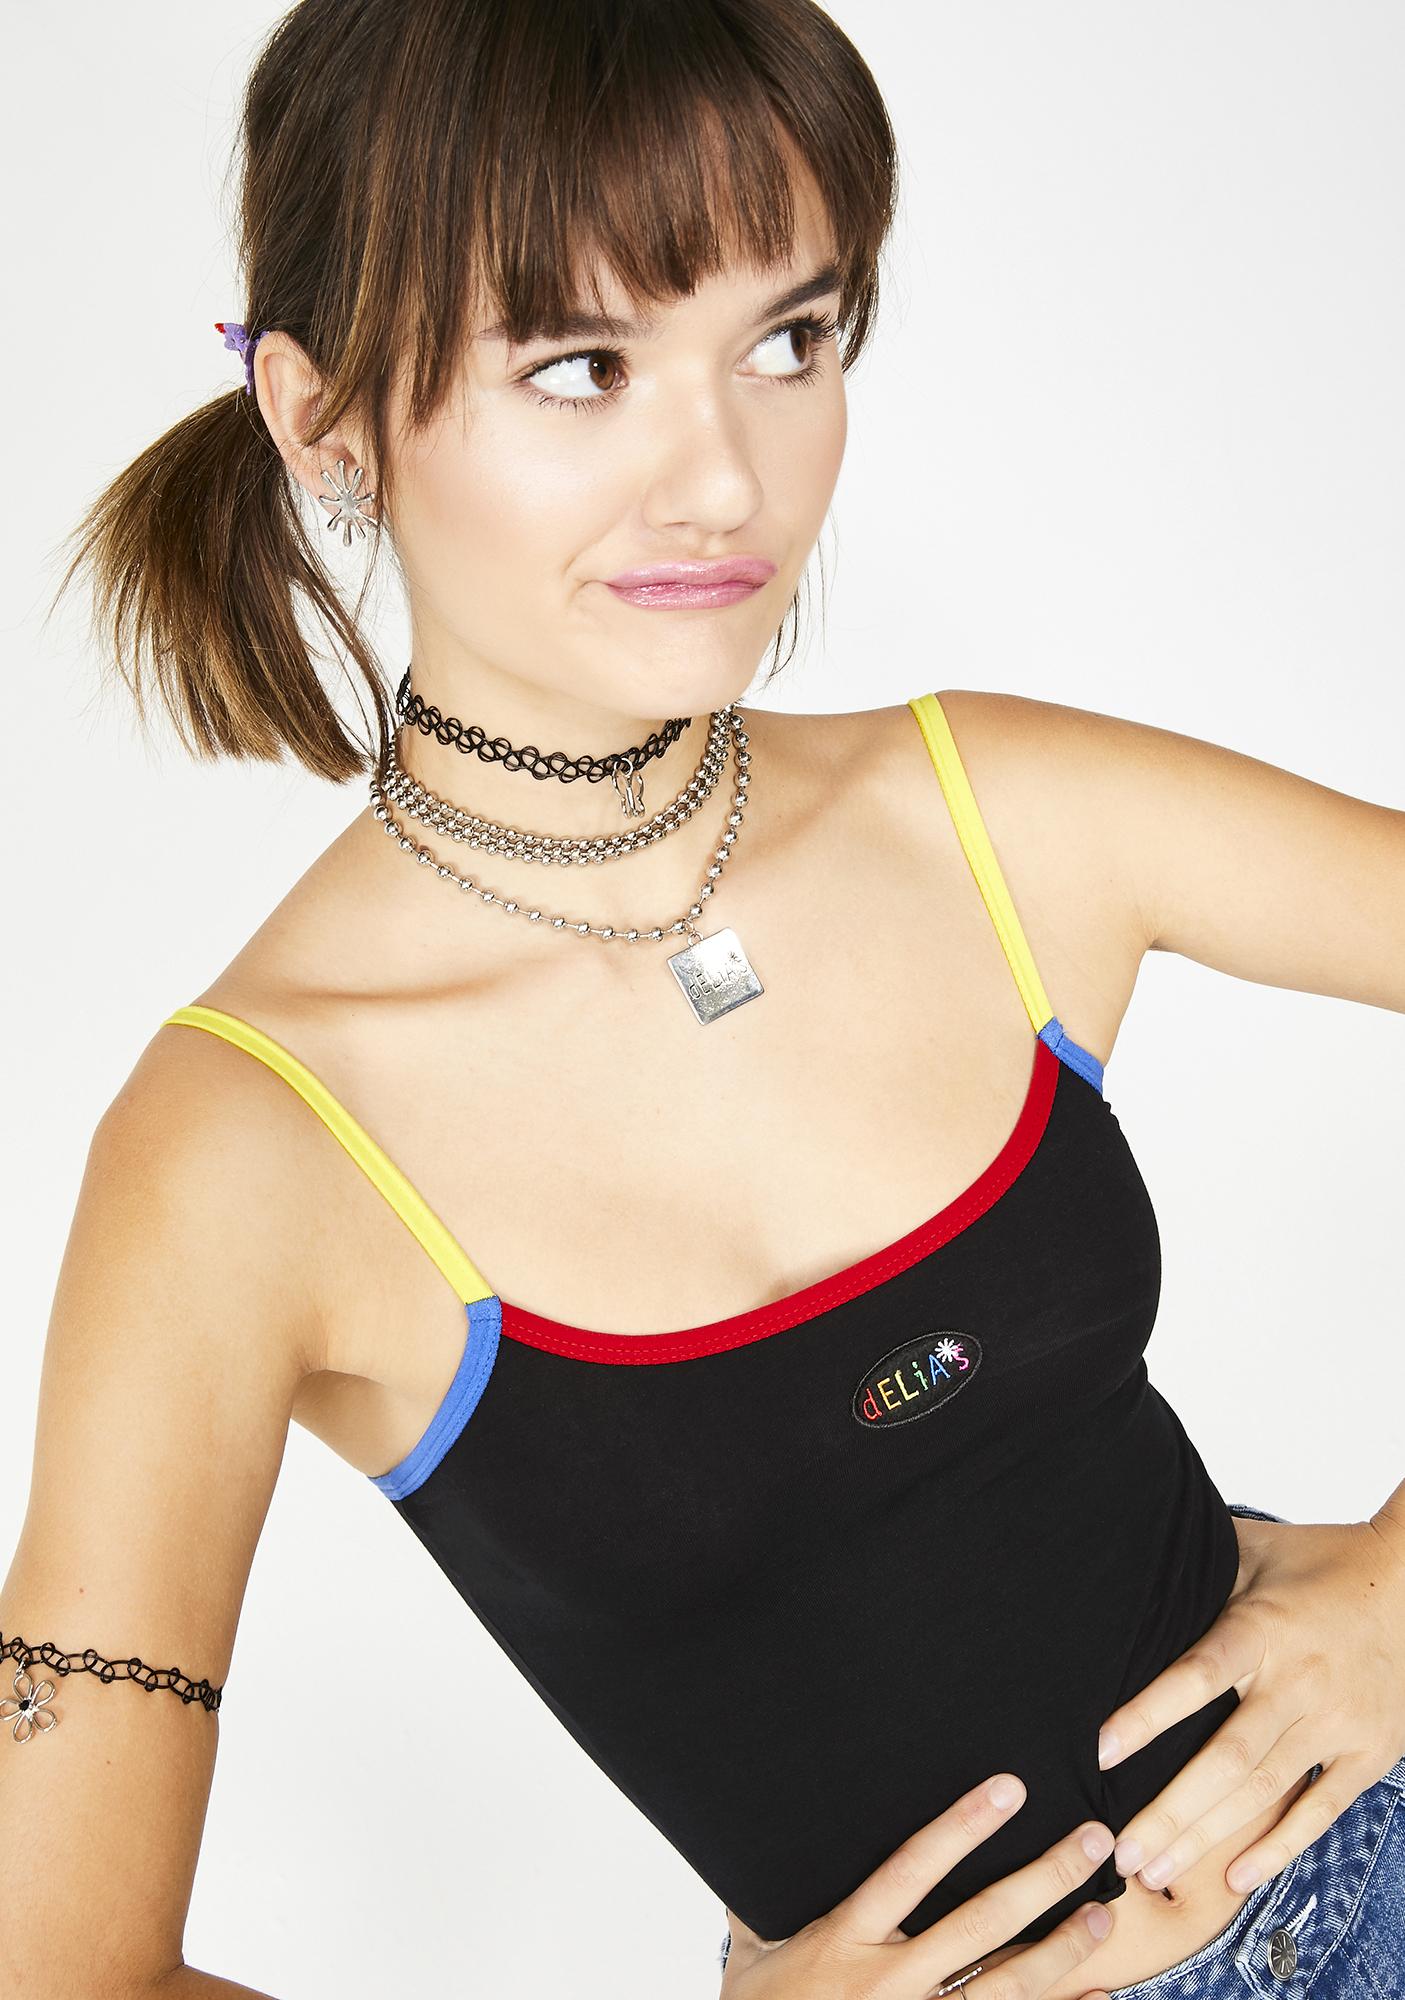 dELiAs Comes Back to Life with this New Fashion Collab